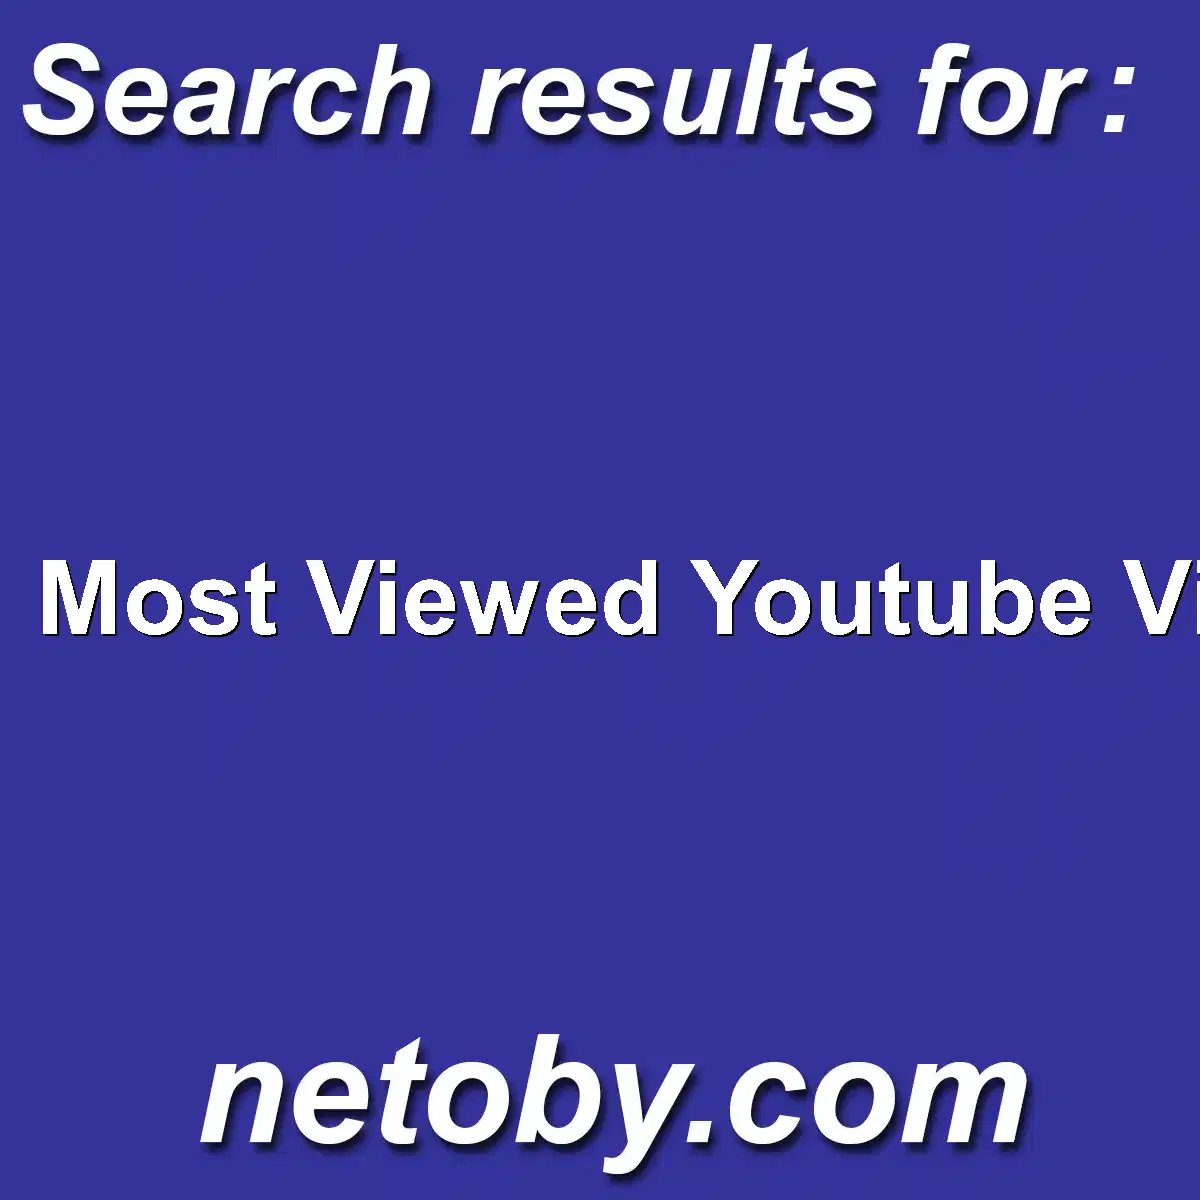 ﻿Most Viewed Youtube Video